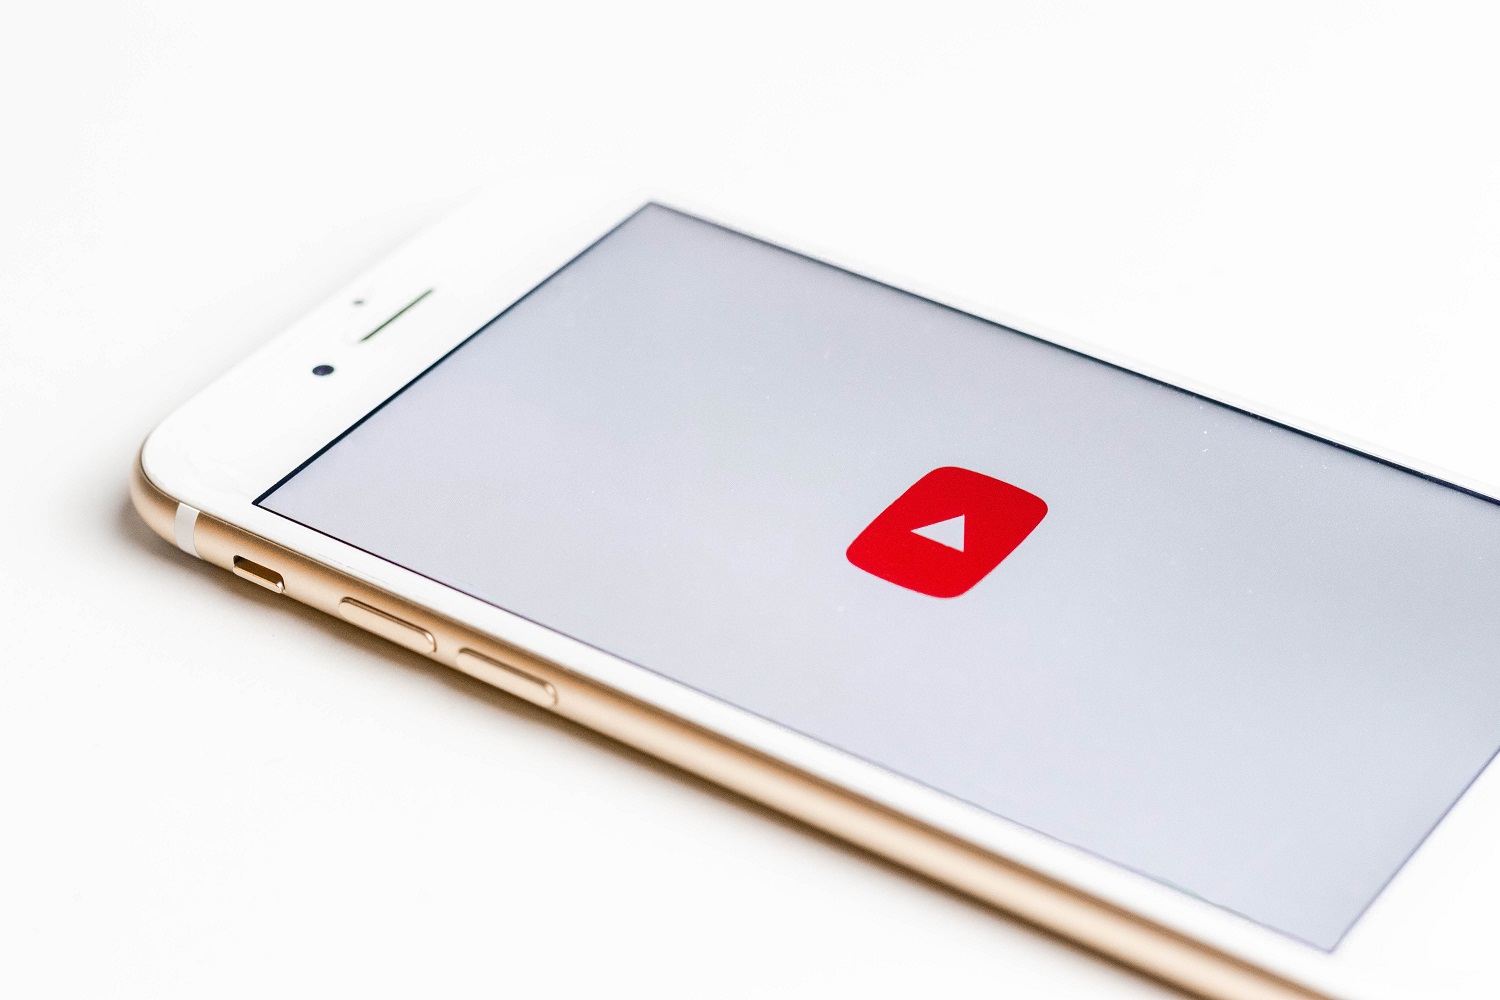 YouTube adds a Personal Story shelf to health topic searches